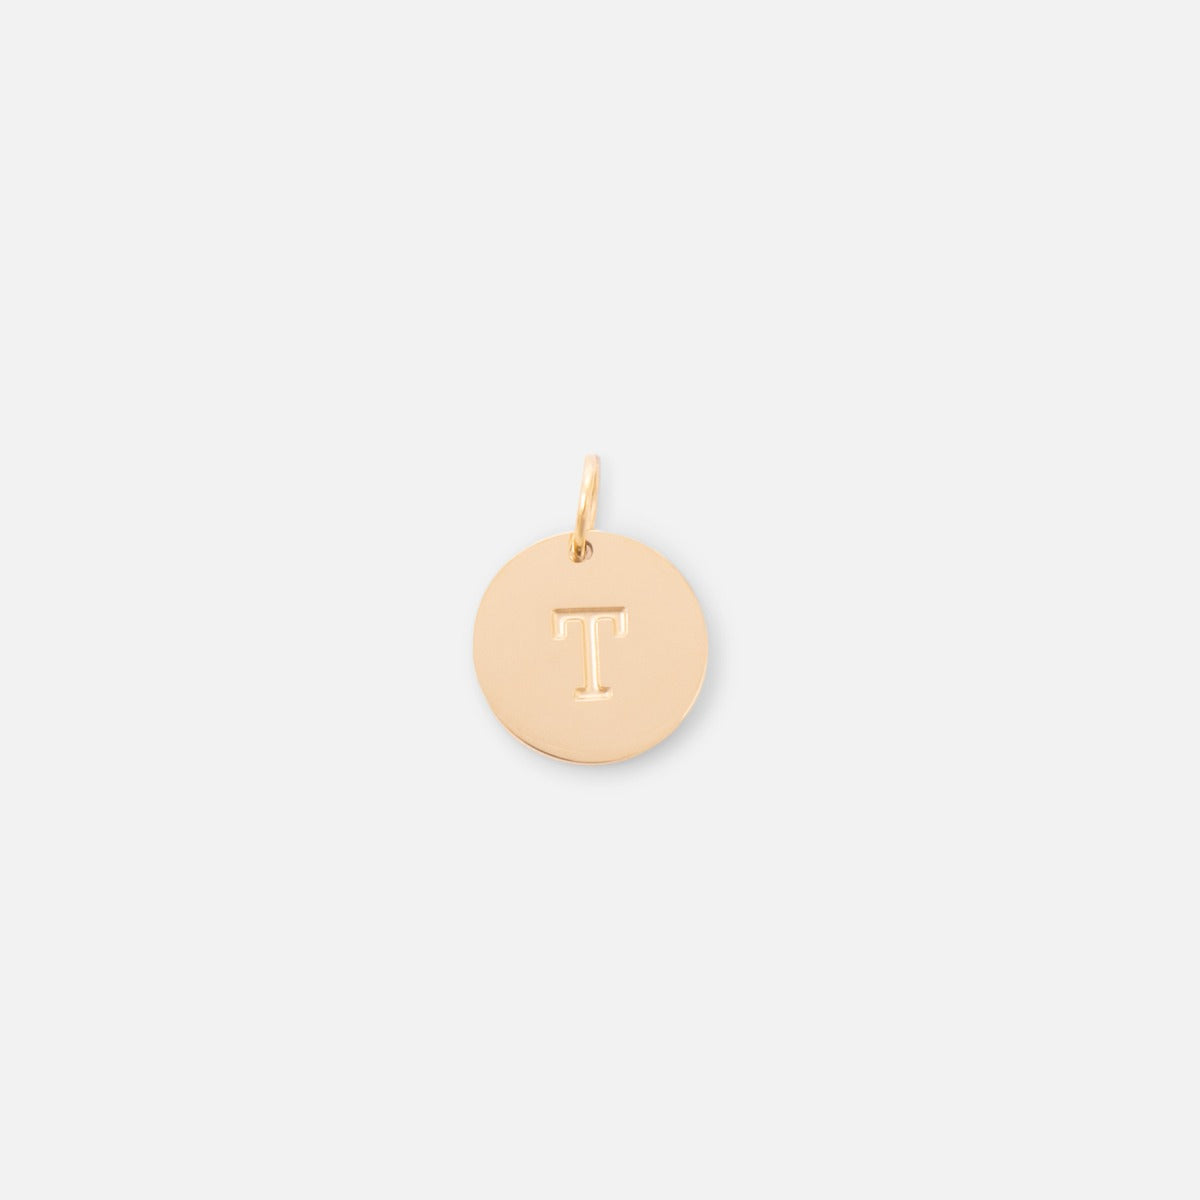 Small symbolic golden charm engraved with the letter of the alphabet "t"